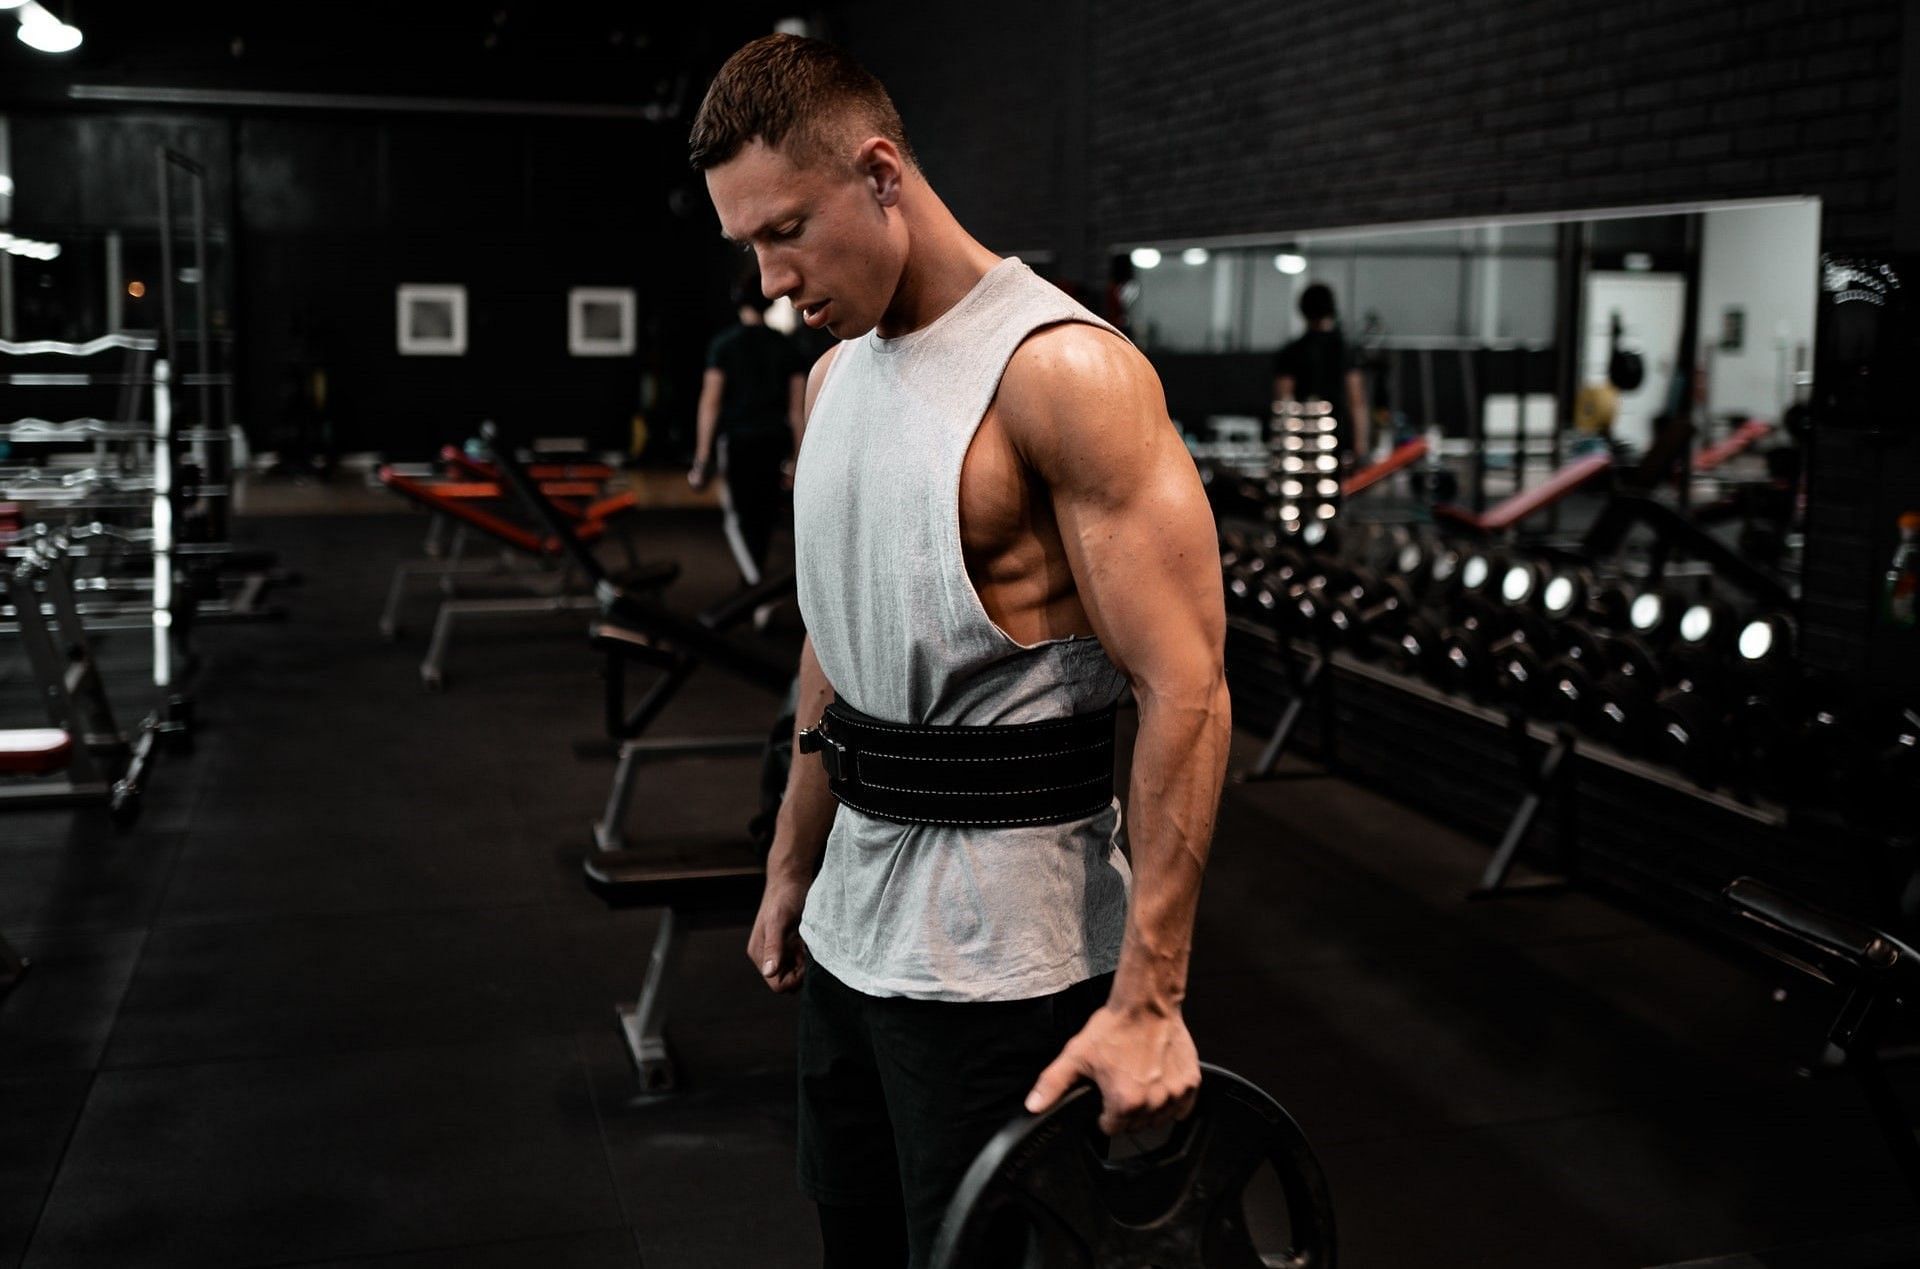 Best compound exercises for beginners to build arms. (Photo via John Fornander/Unsplash)